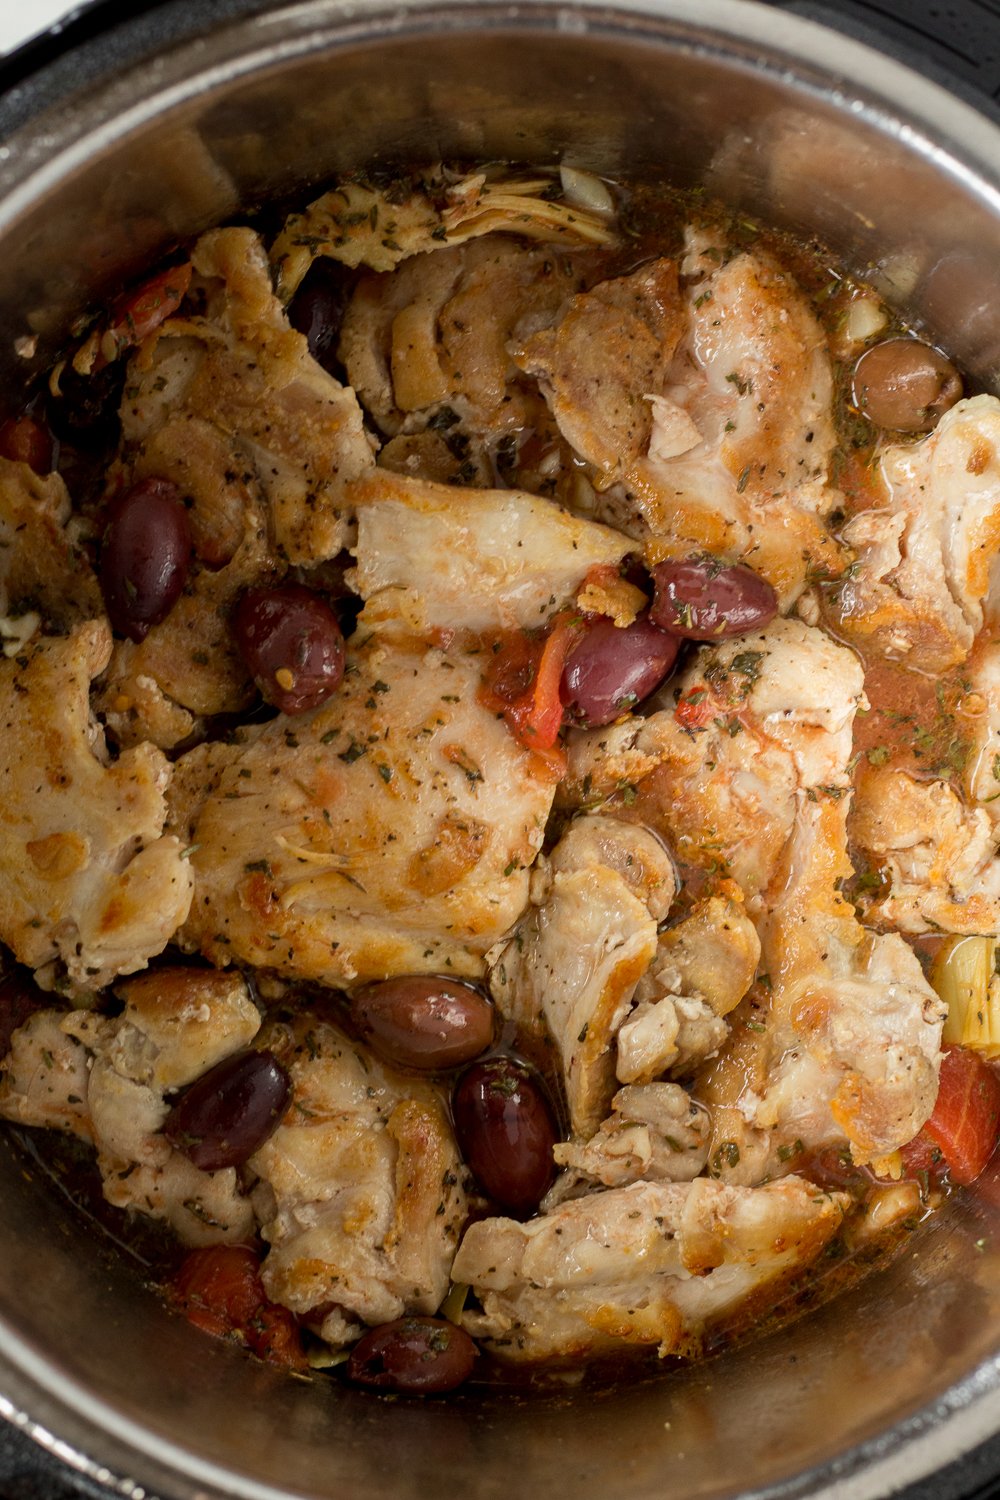 Uncooked chicken thighs with kalamata olives, artichocke hearts, and tomatoes in an Instant Pot.